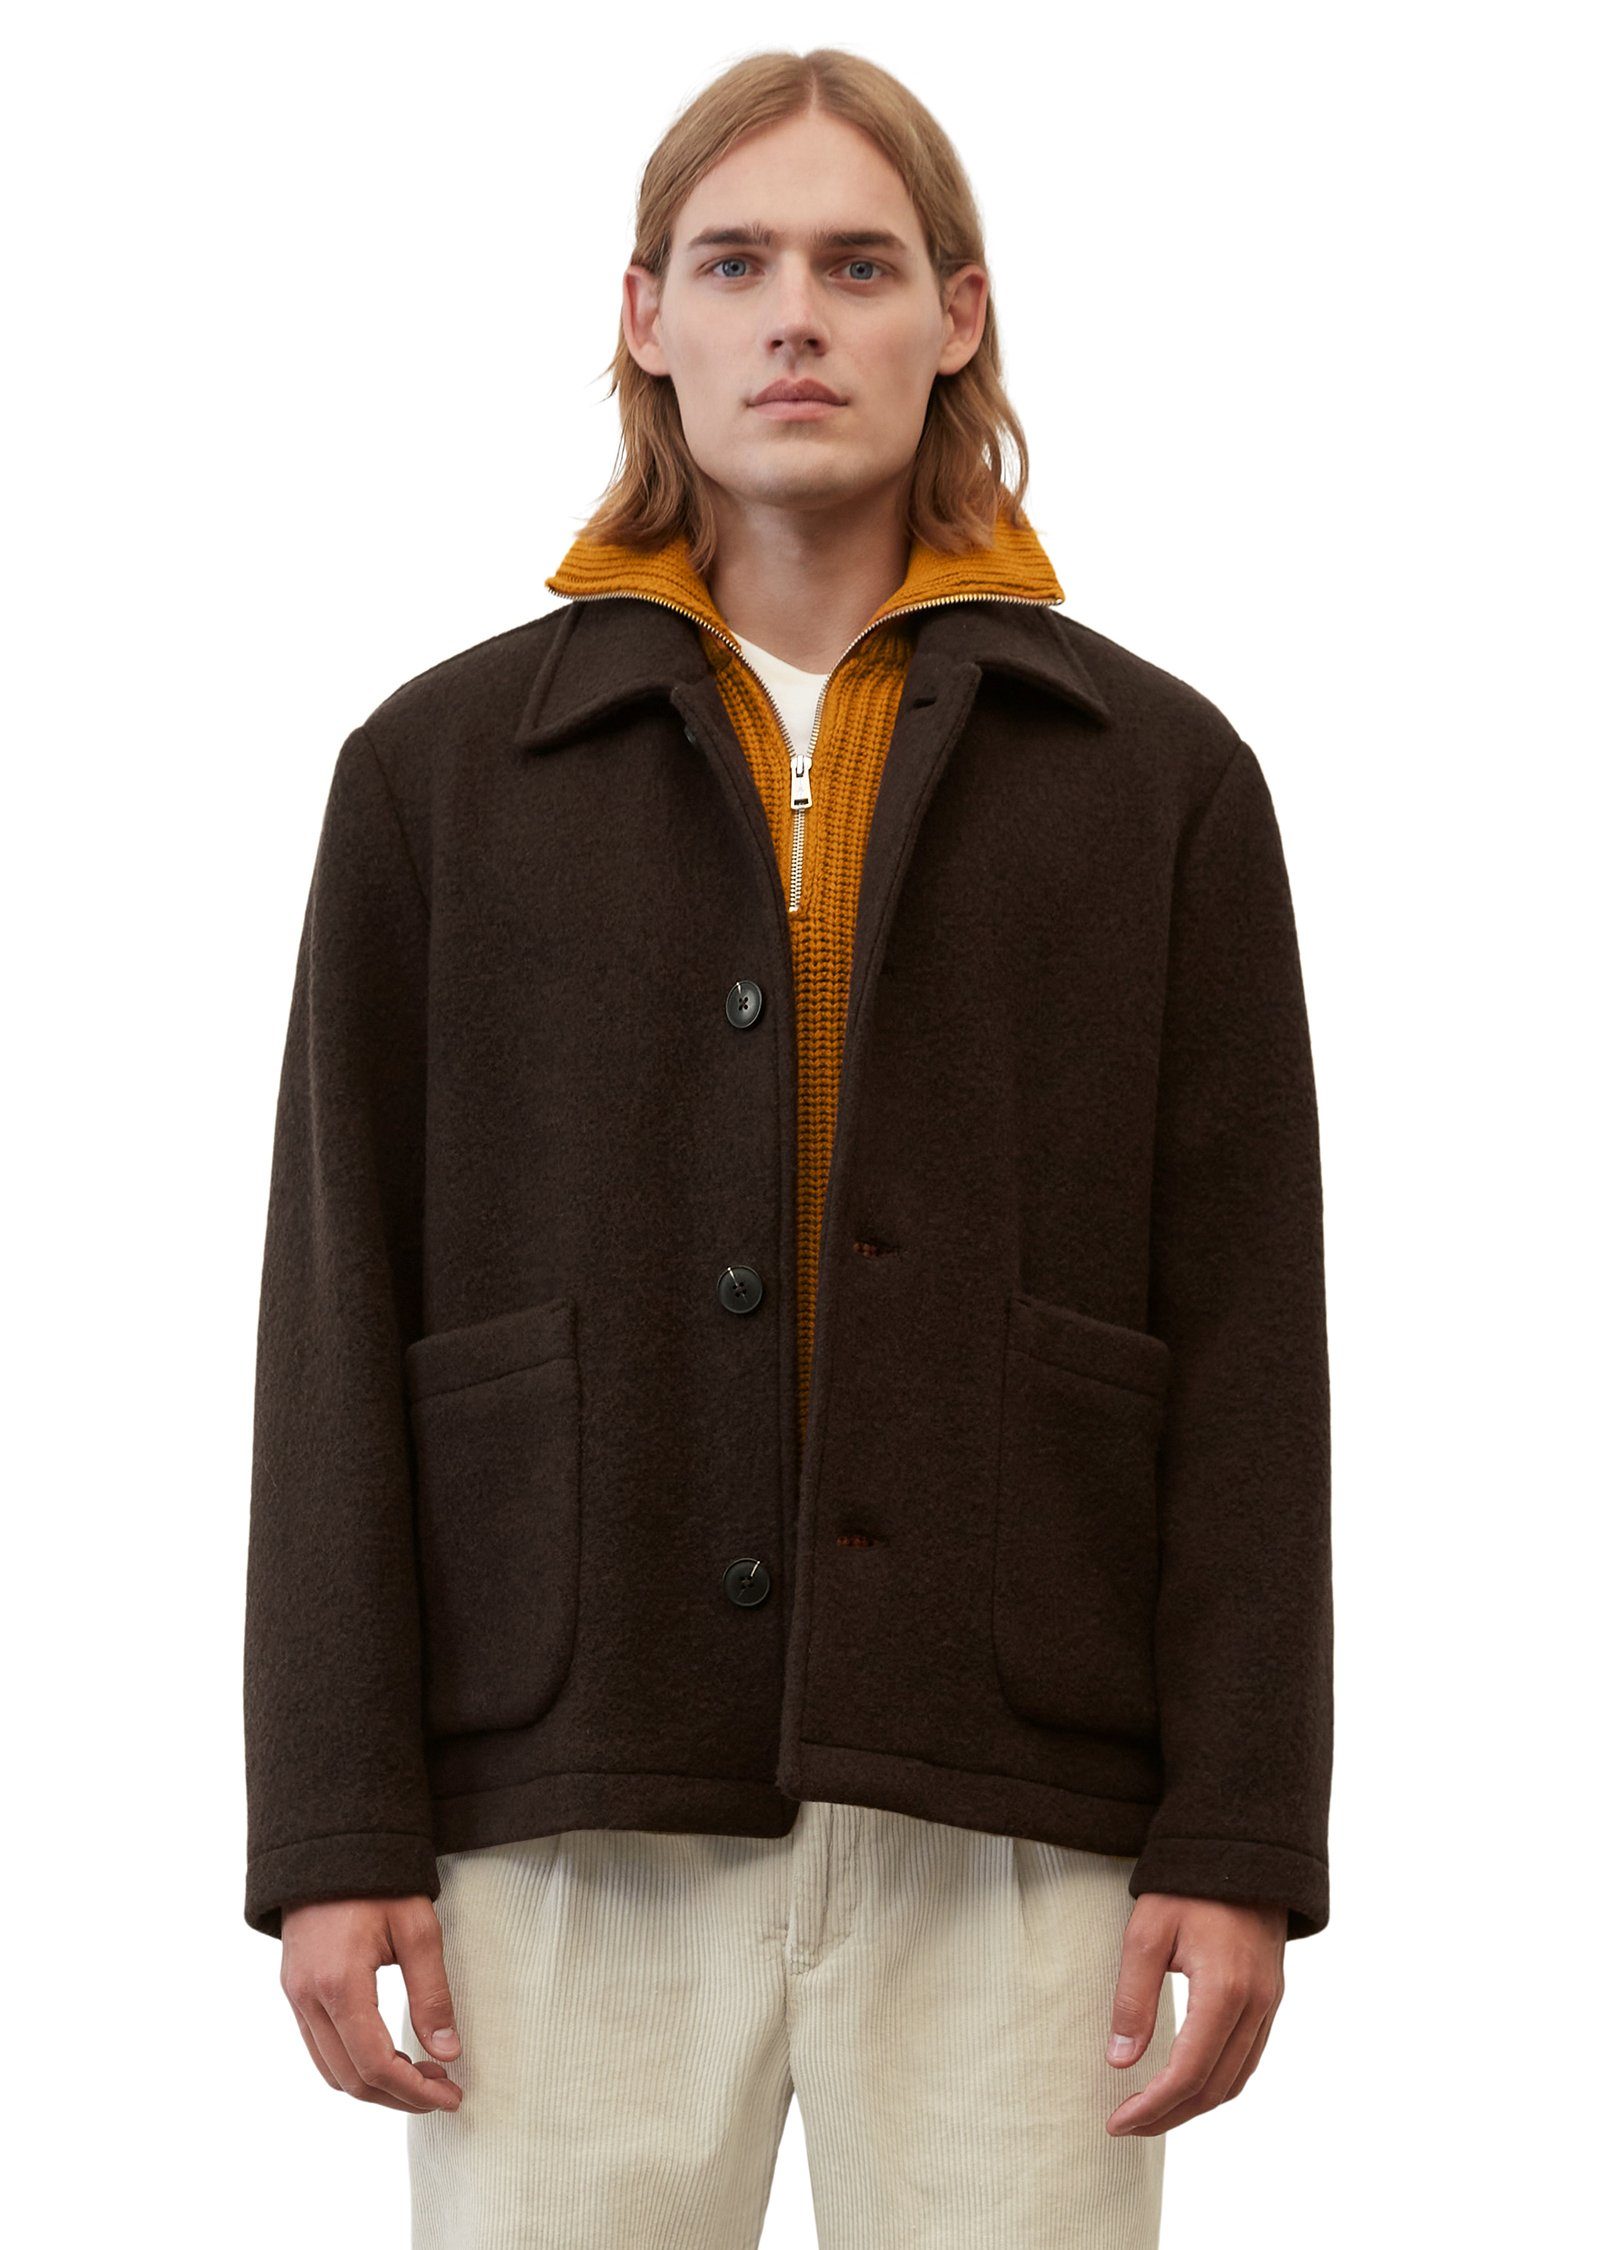 Marc O'Polo Outdoorjacke aus MWOOL®by MANTECO® - Made in Europe braun